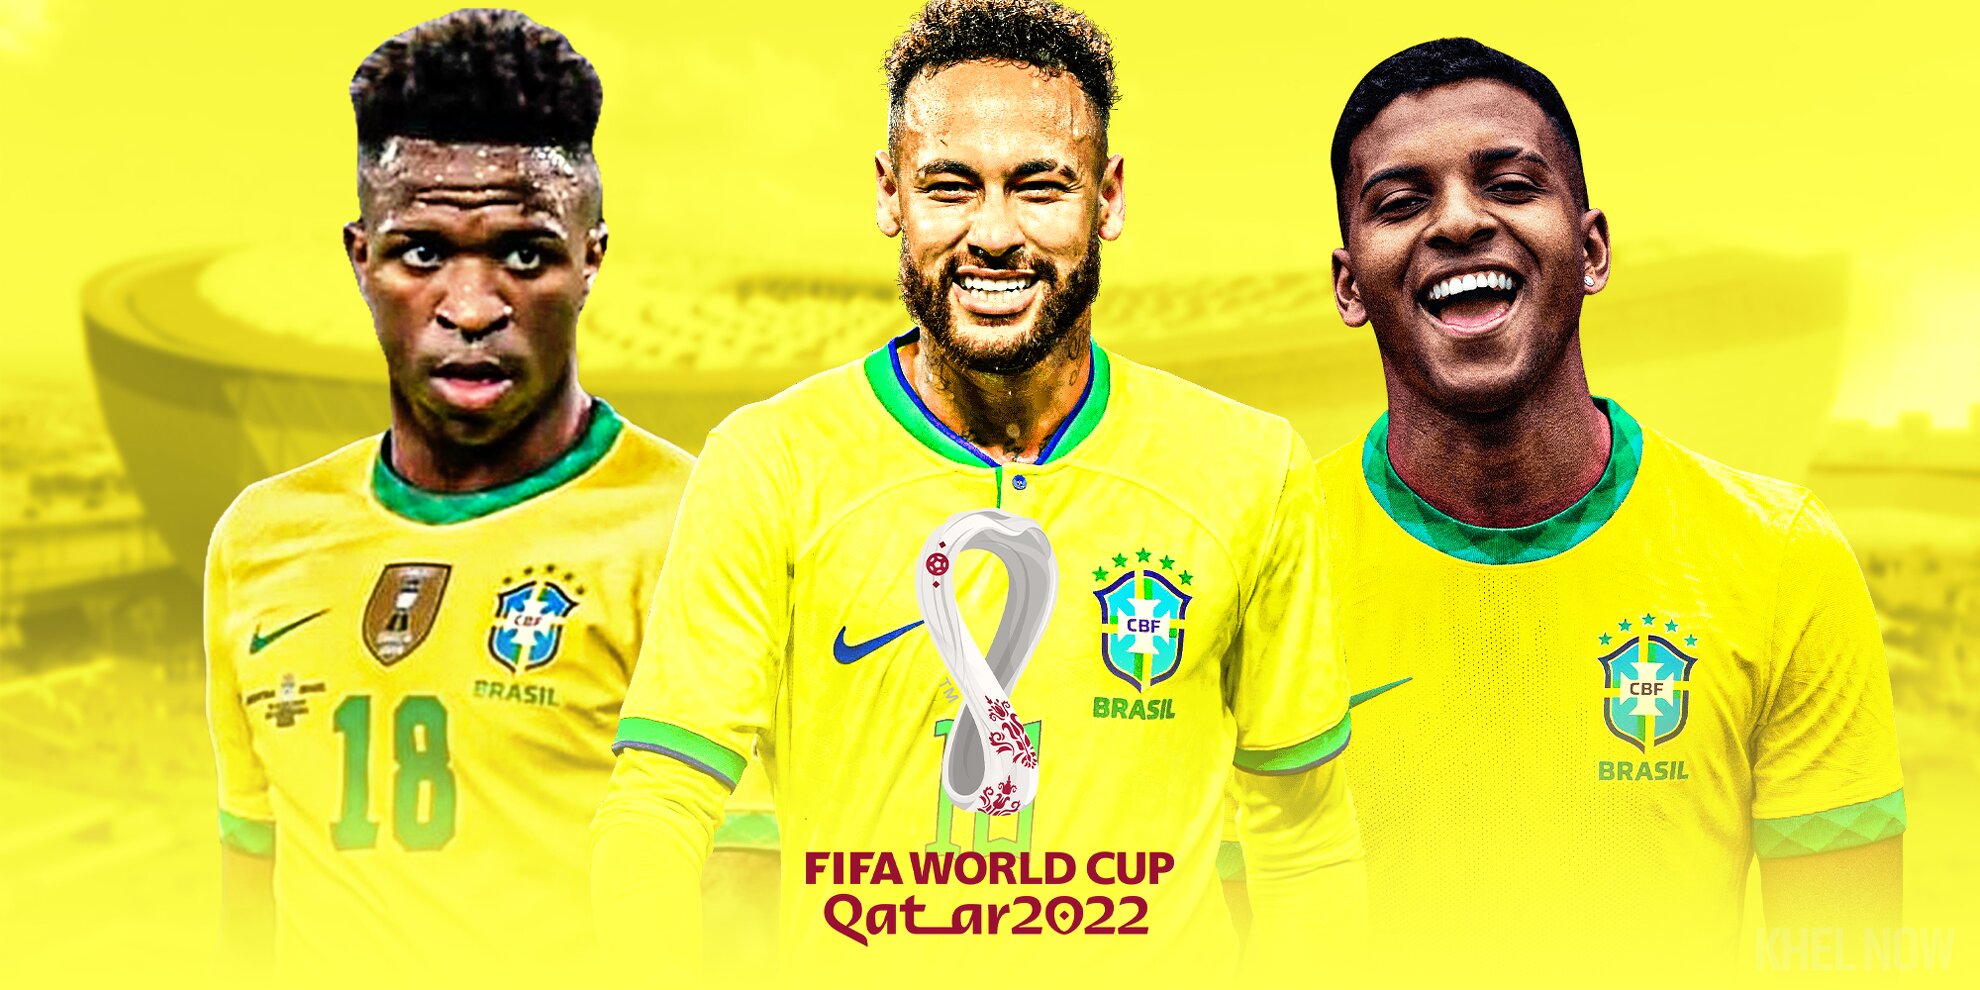 Five players that can help Neymar and Brazil win FIFA World Cup 2022